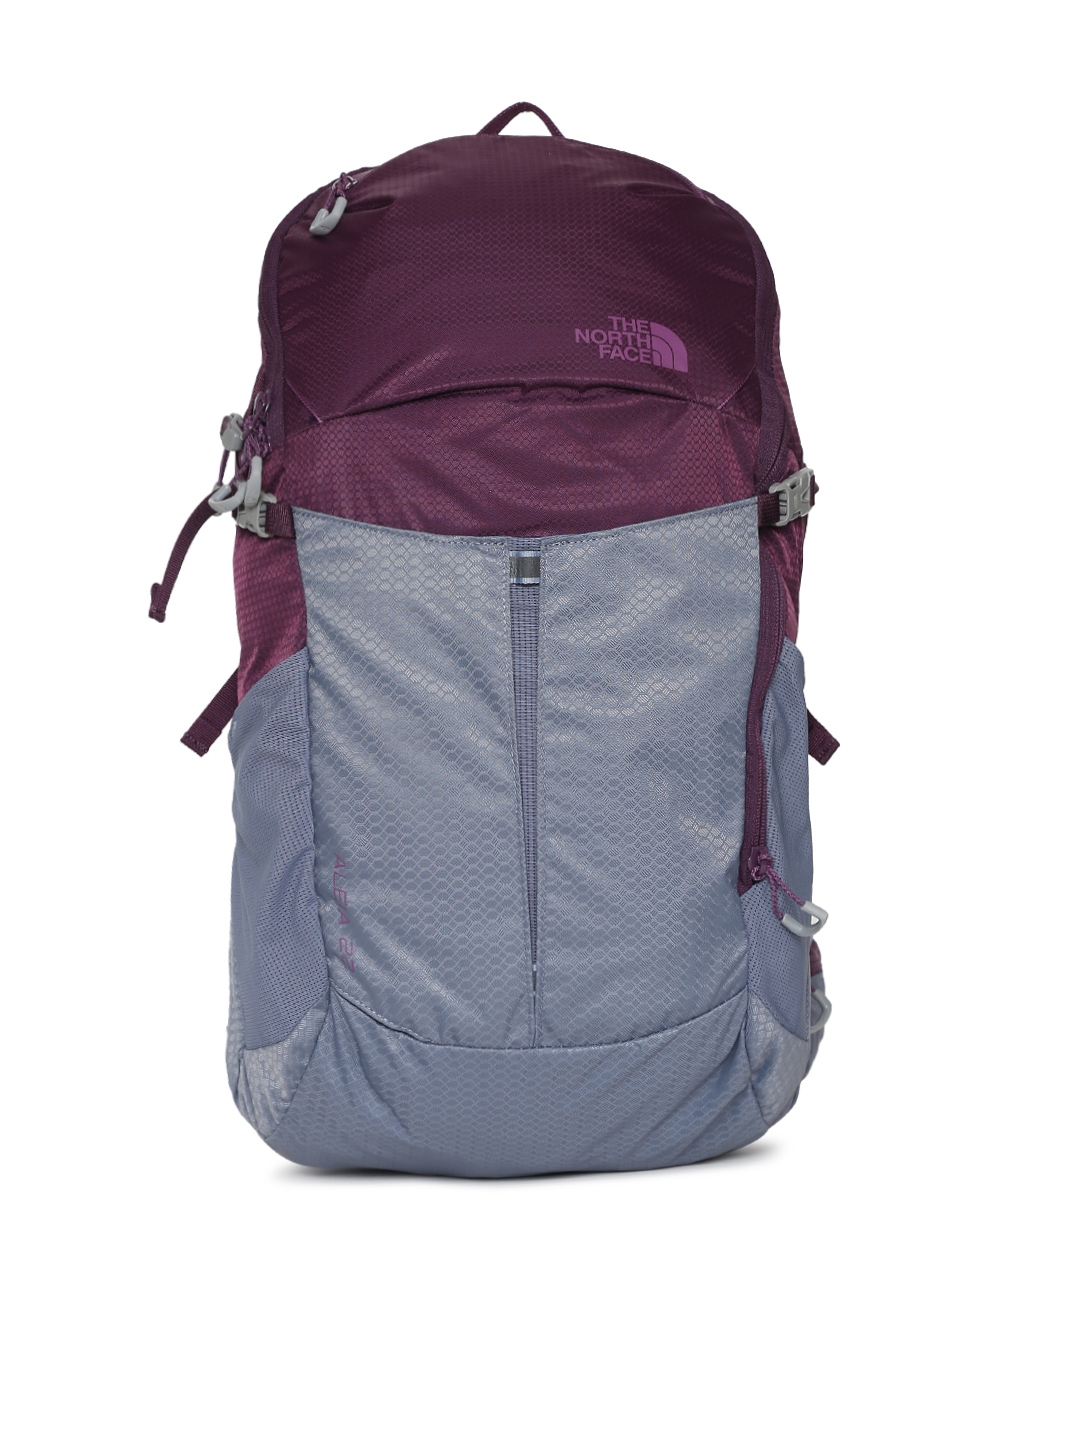 Buy The North Face Unisex Purple & Grey Colourblocked Backpack